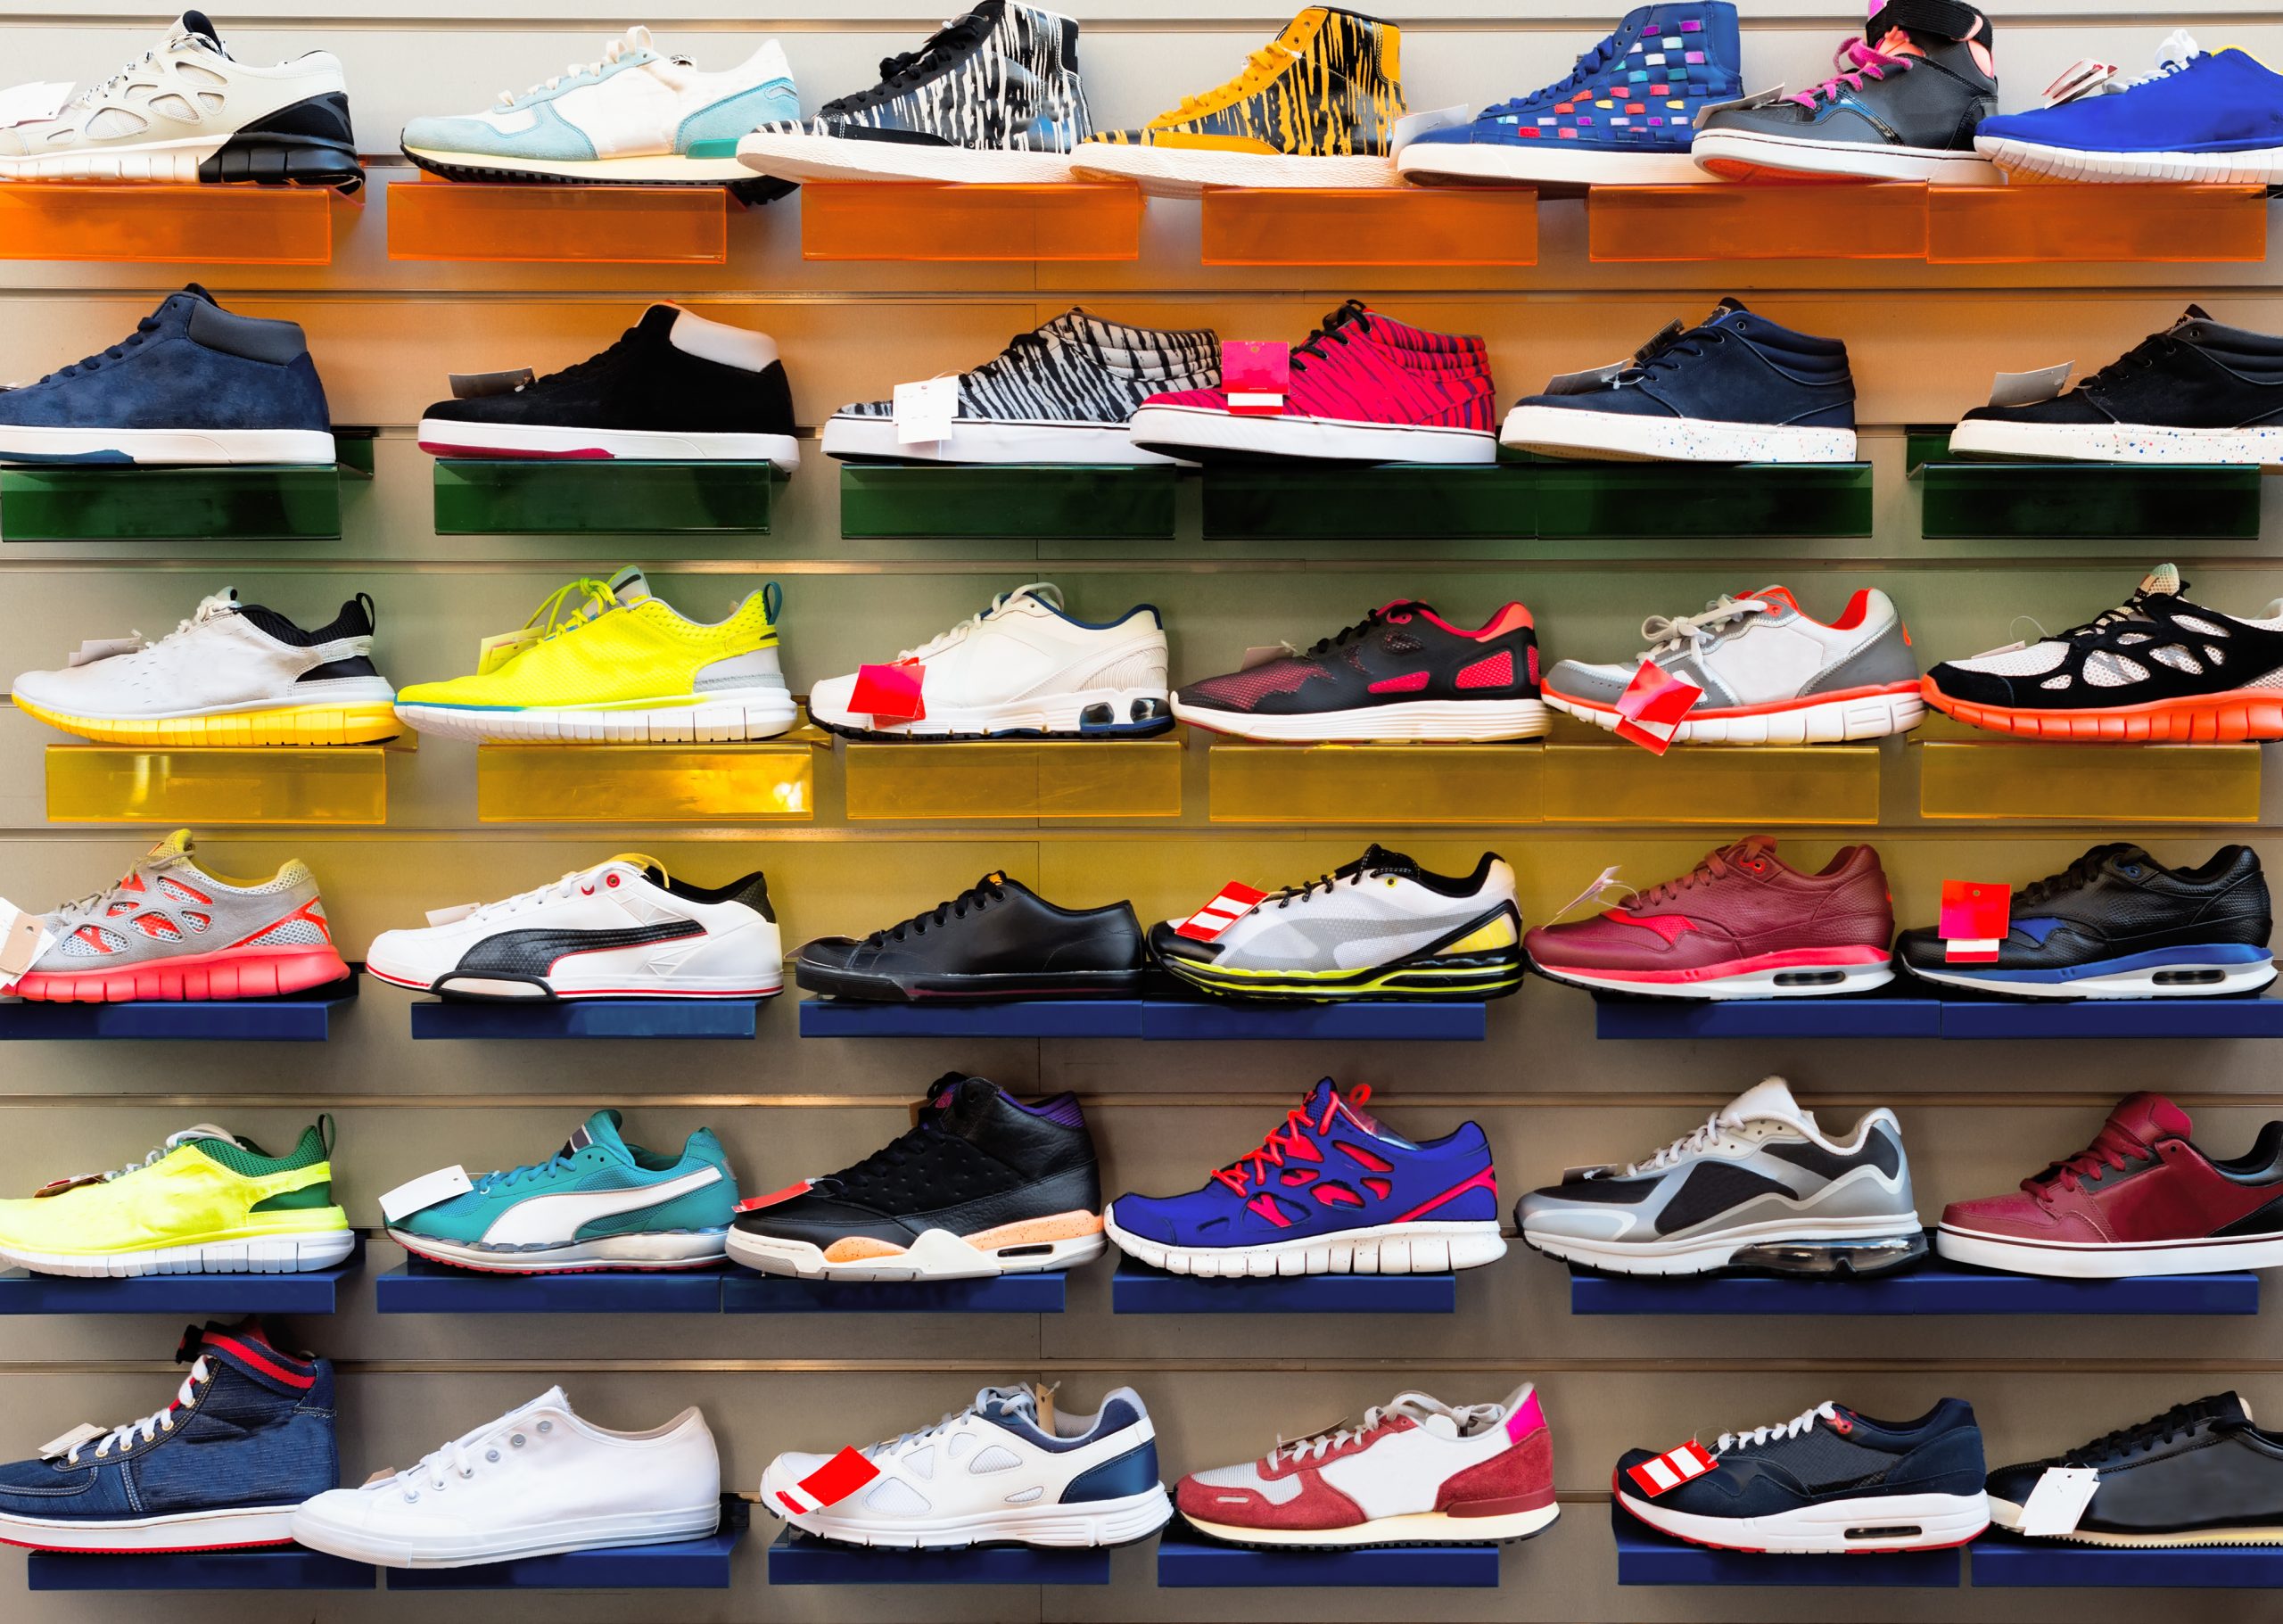 Choosing the right athletic shoe - Cayman Health and Wellness